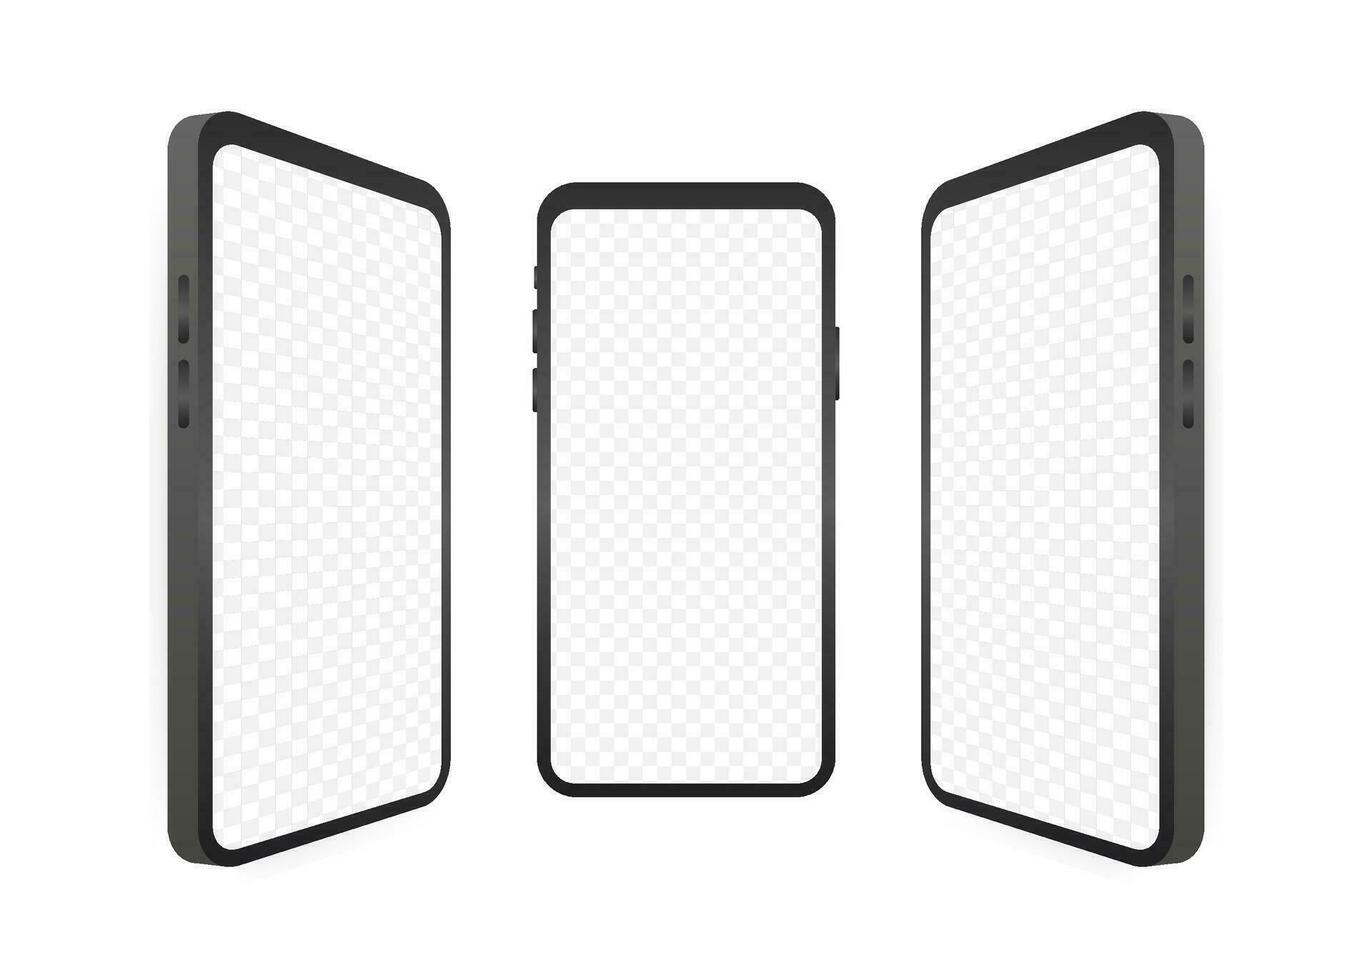 Smartphone mockup. Cellphone frame with blank display isolated templates. Vector stock illustration